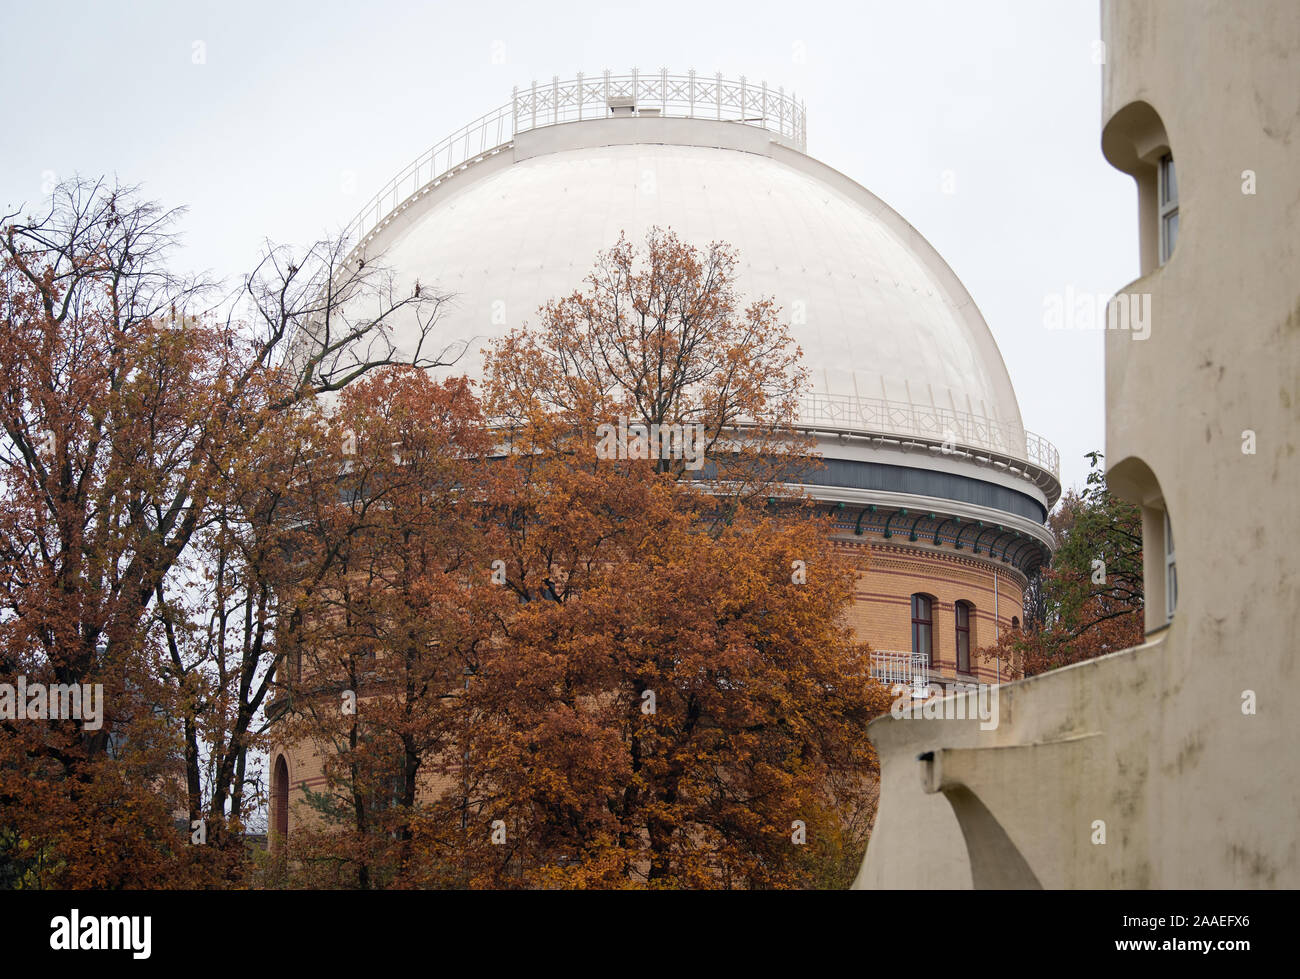 Potsdam, Germany. 18th Nov, 2019. The Einstein Tower (r), designed by Erich Mendelsohn, and the dome of the Great Refractor of the Astrophysical Institute between autumnal leafy trees in the Albert Einstein Science Park. The park was created in the middle of the 19th century with astronomical, meteorological and geoscientific observatories. The architect Paul Spieker was the planner of the park. Credit: Soeren Stache/dpa-Zentralbild/ZB/dpa/Alamy Live News Stock Photo